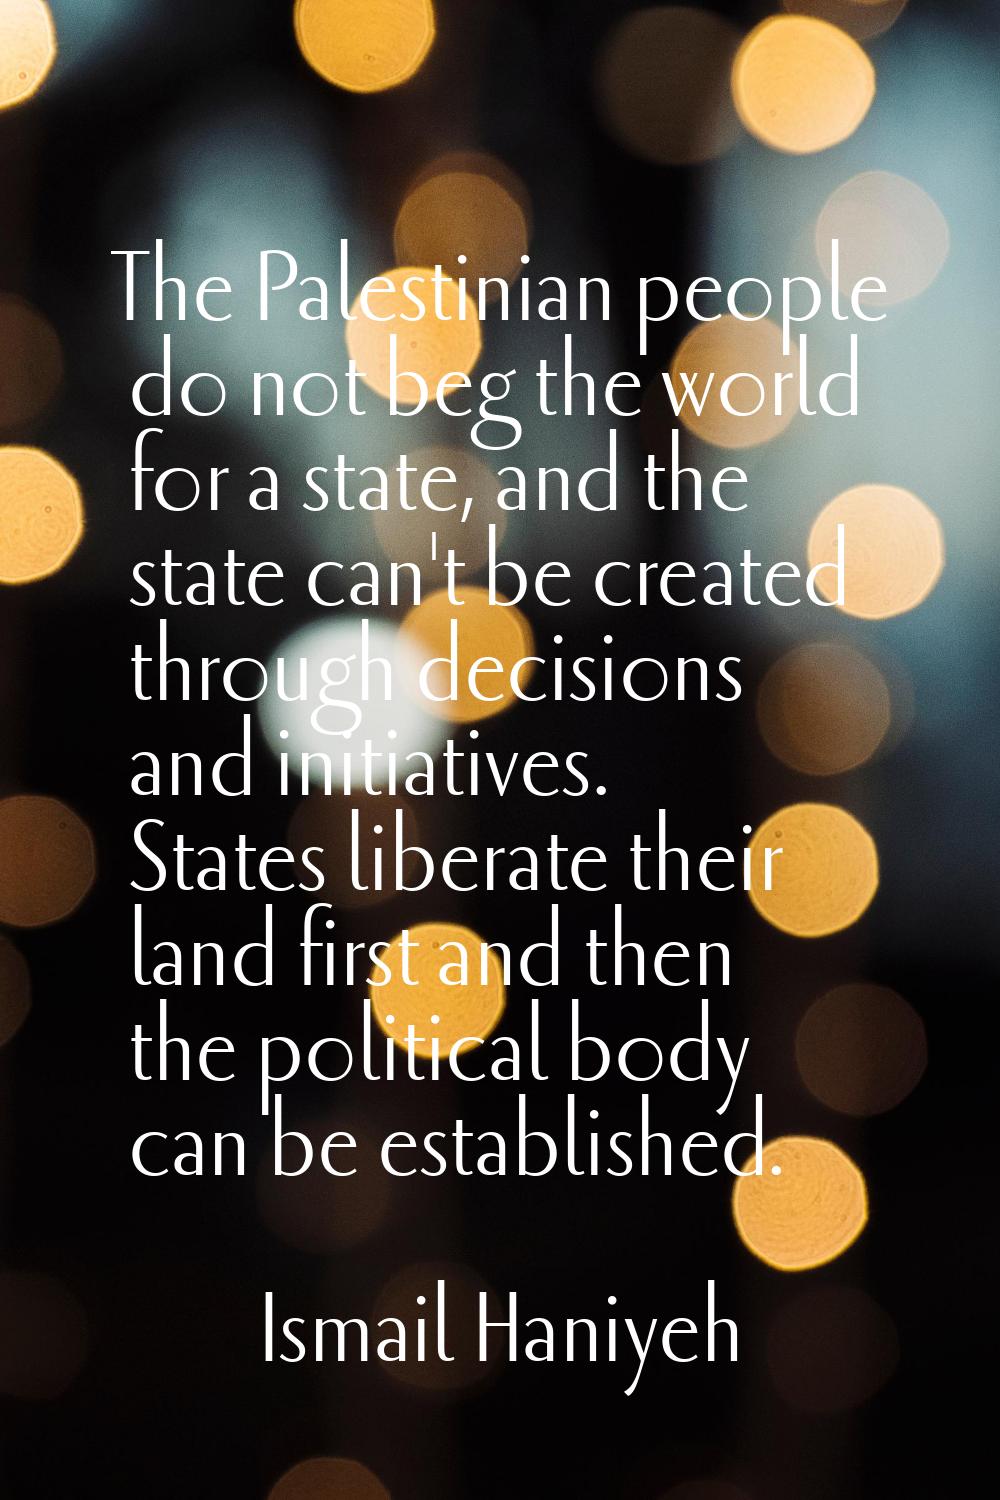 The Palestinian people do not beg the world for a state, and the state can't be created through dec